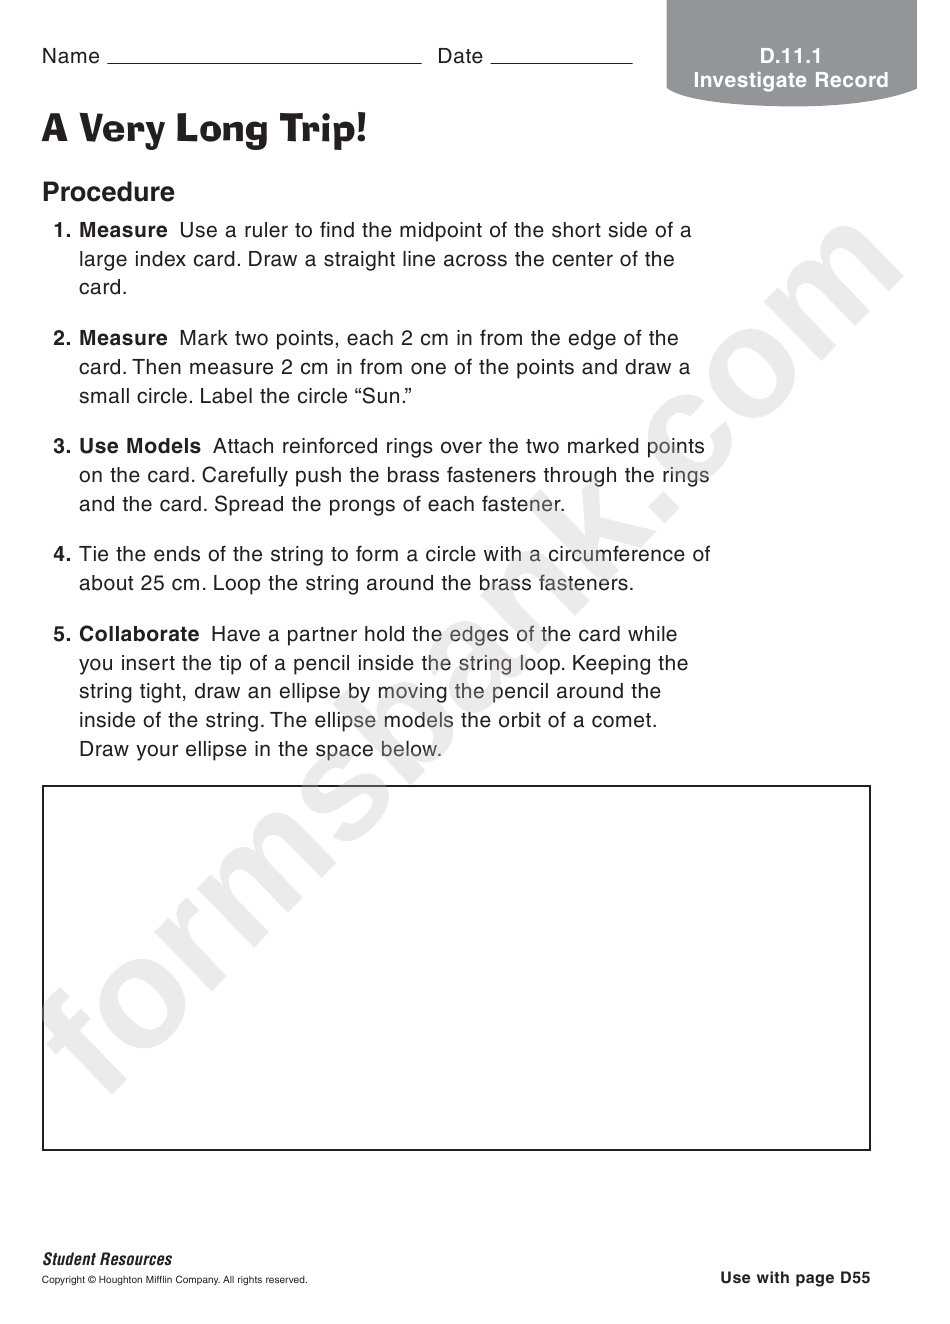 A Very Long Trip Astronomy Worksheet